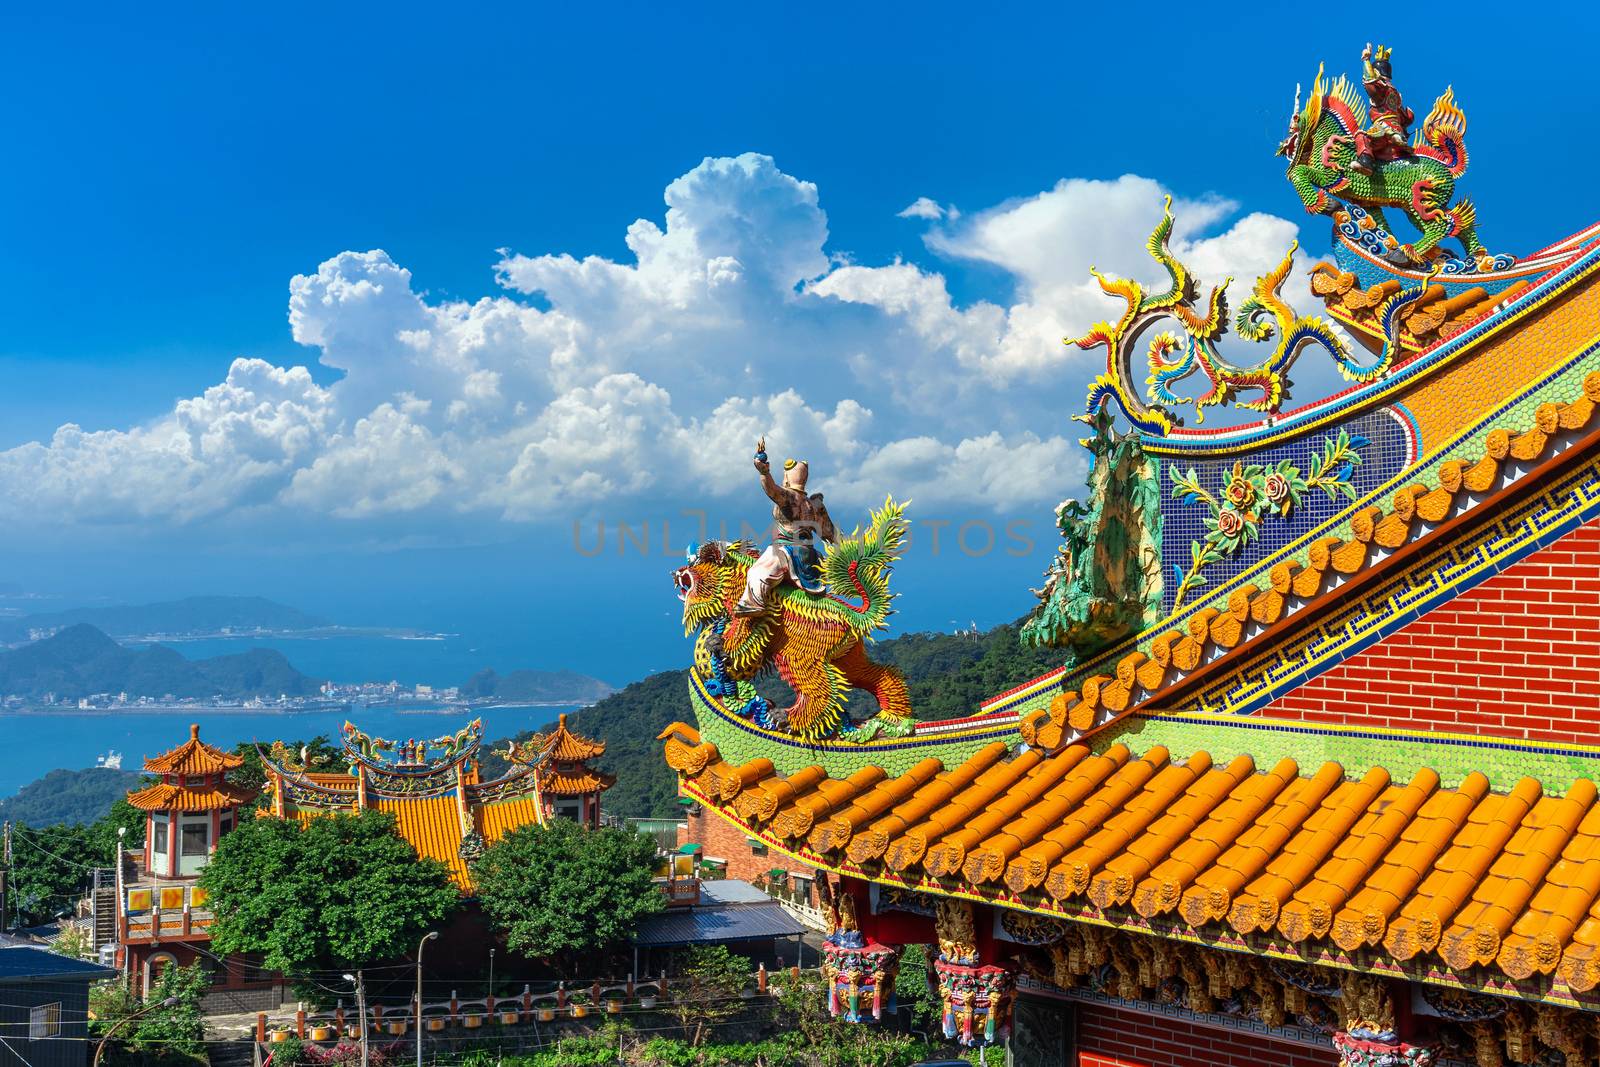 Roof of temple in Jiufen old street, Taiwan by gutarphotoghaphy